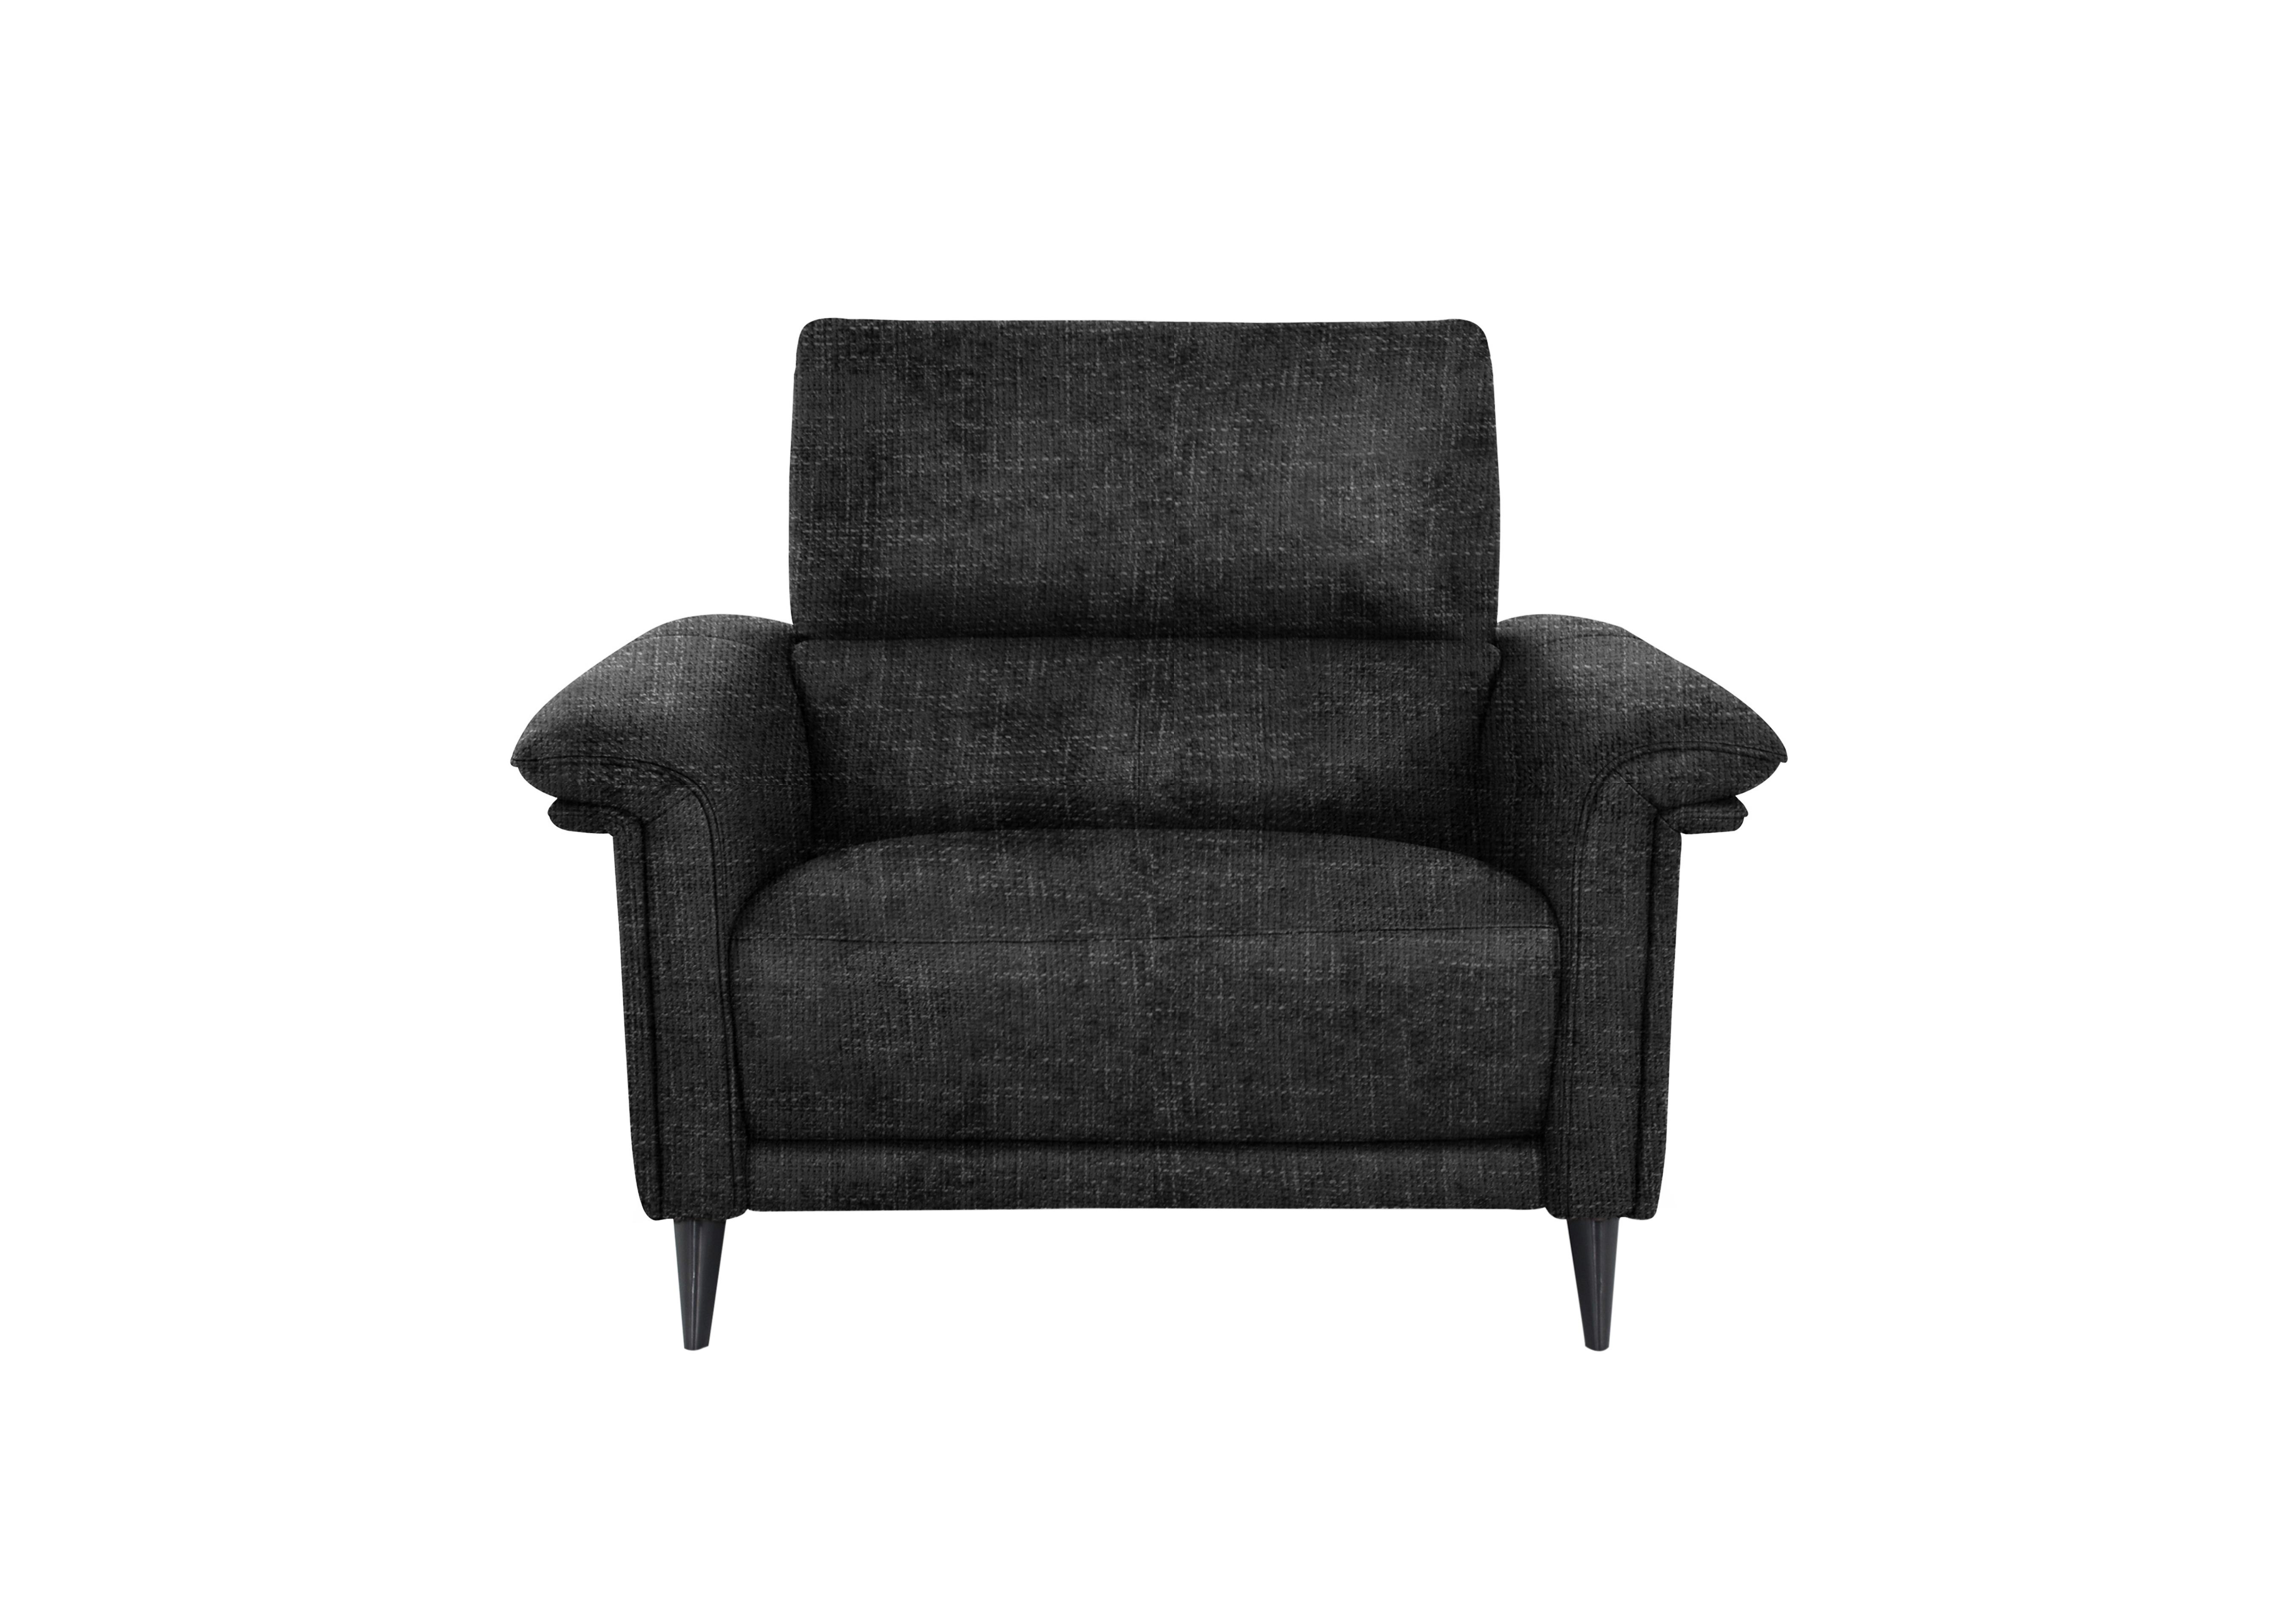 Huxley Fabric Chair in Fab-Cac-R463 Black Mica on Furniture Village